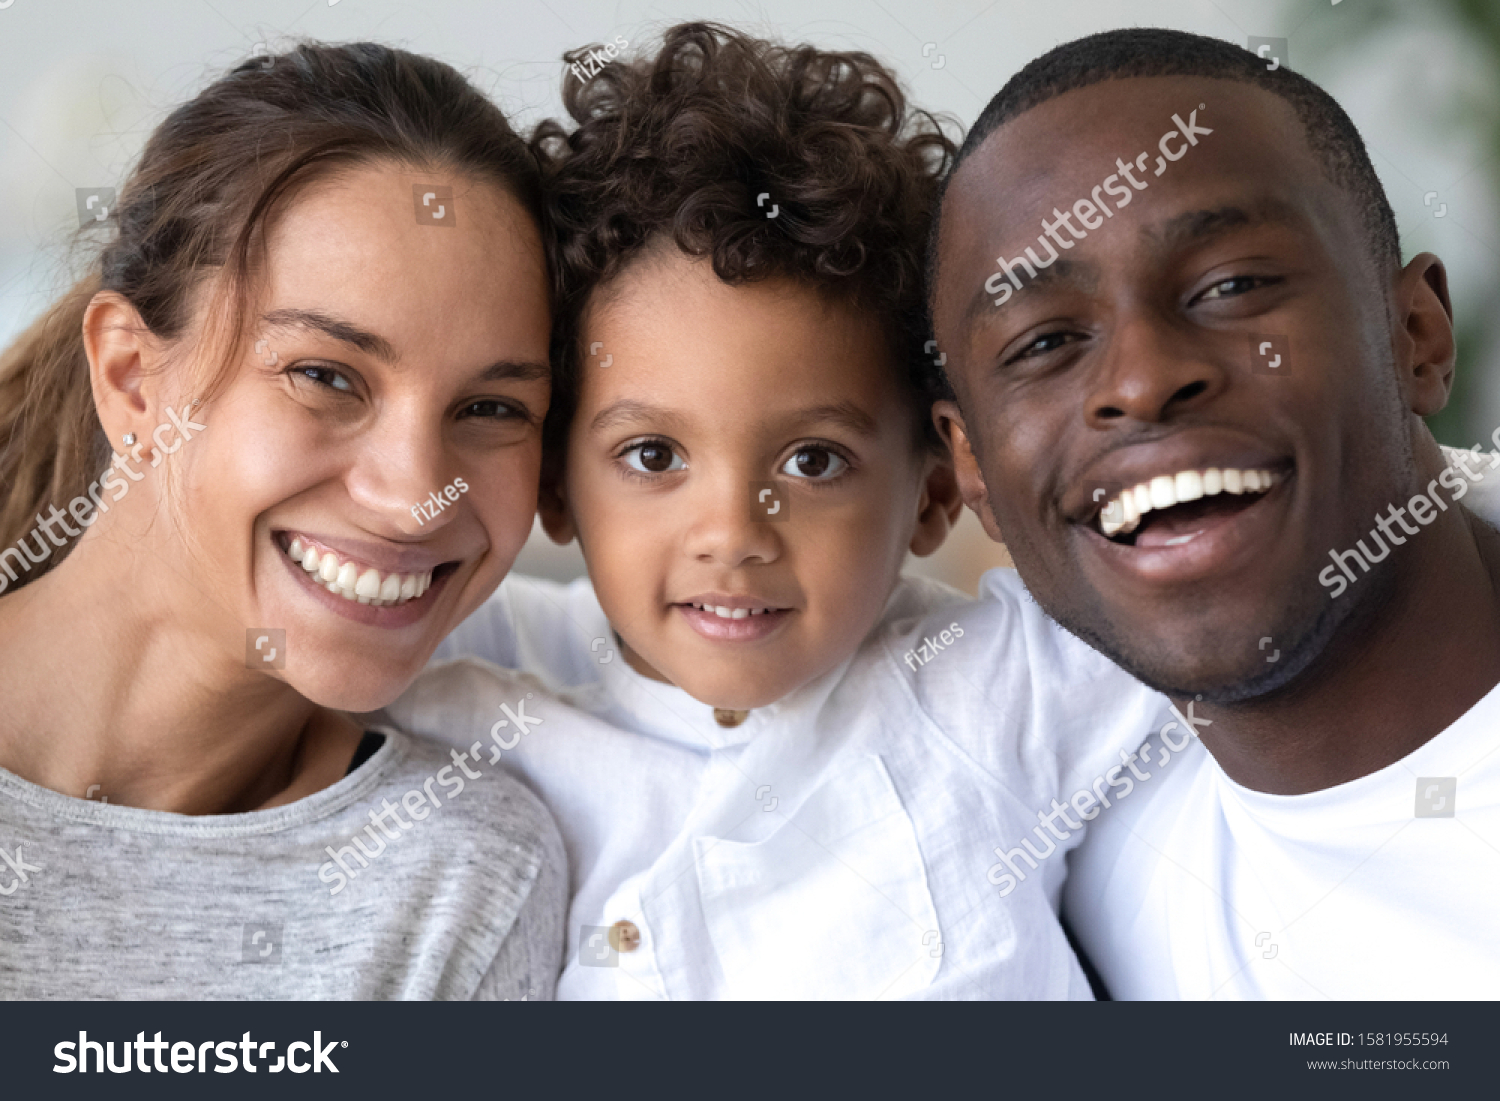 Head shot portrait close up smiling African American mother, father and son with healthy white smiles, happy family posing for photo, looking at camera, cute little child embracing parents #1581955594